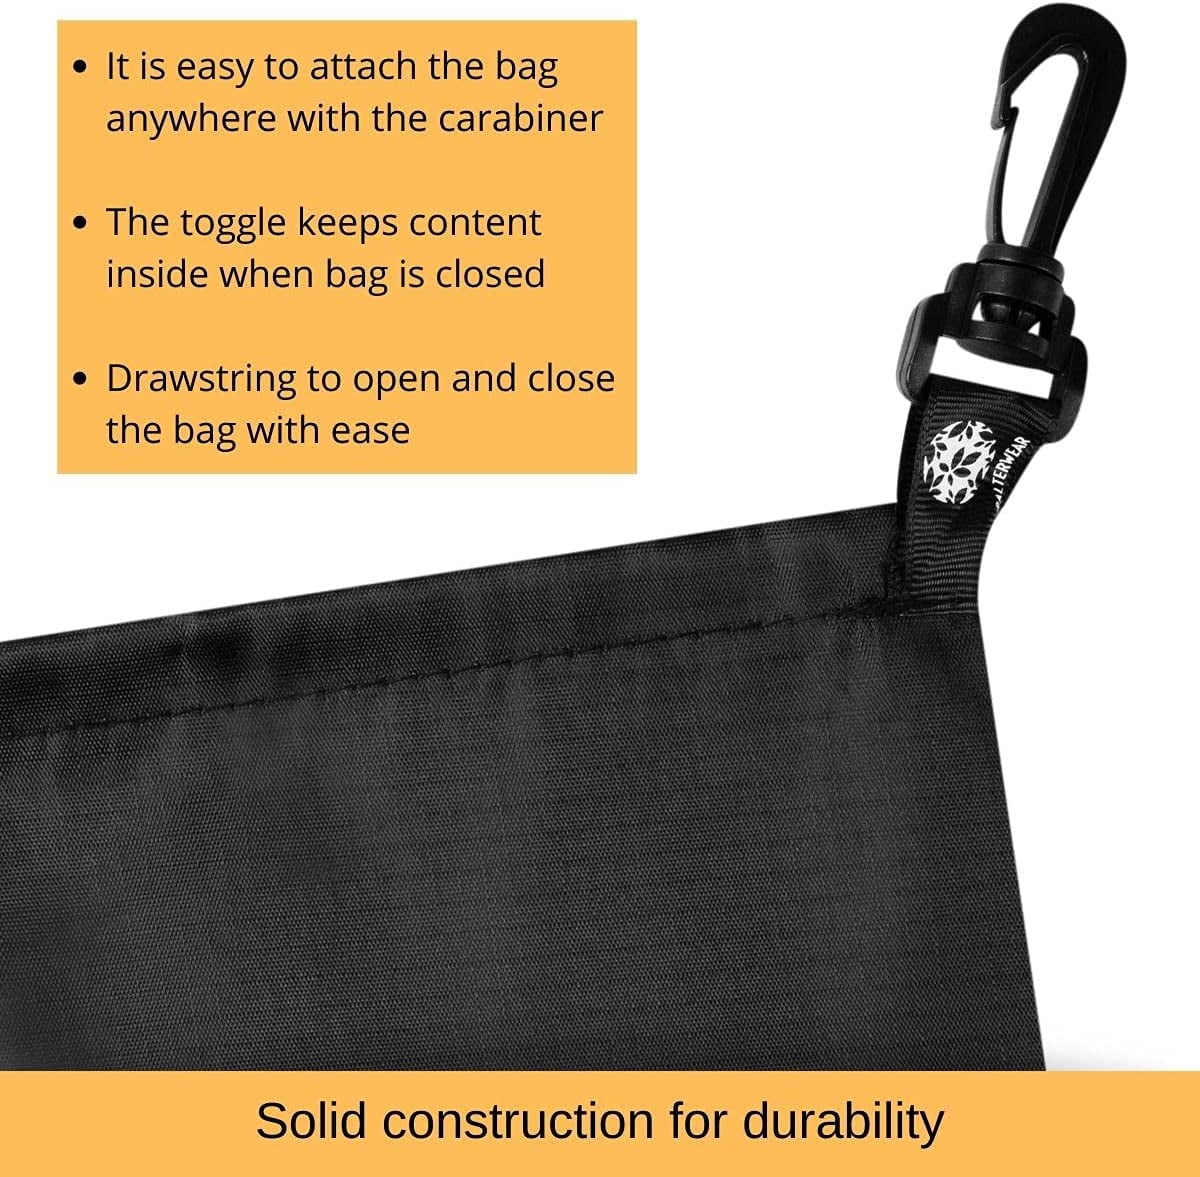 OVOY Drawstring Bags/Pouch/Ditty/Mesh-Stuff-Sack for CAMPING/TRAVEL Cord/Bag - Storage 5-in-1 Travel Use Nylon 5 Pieces